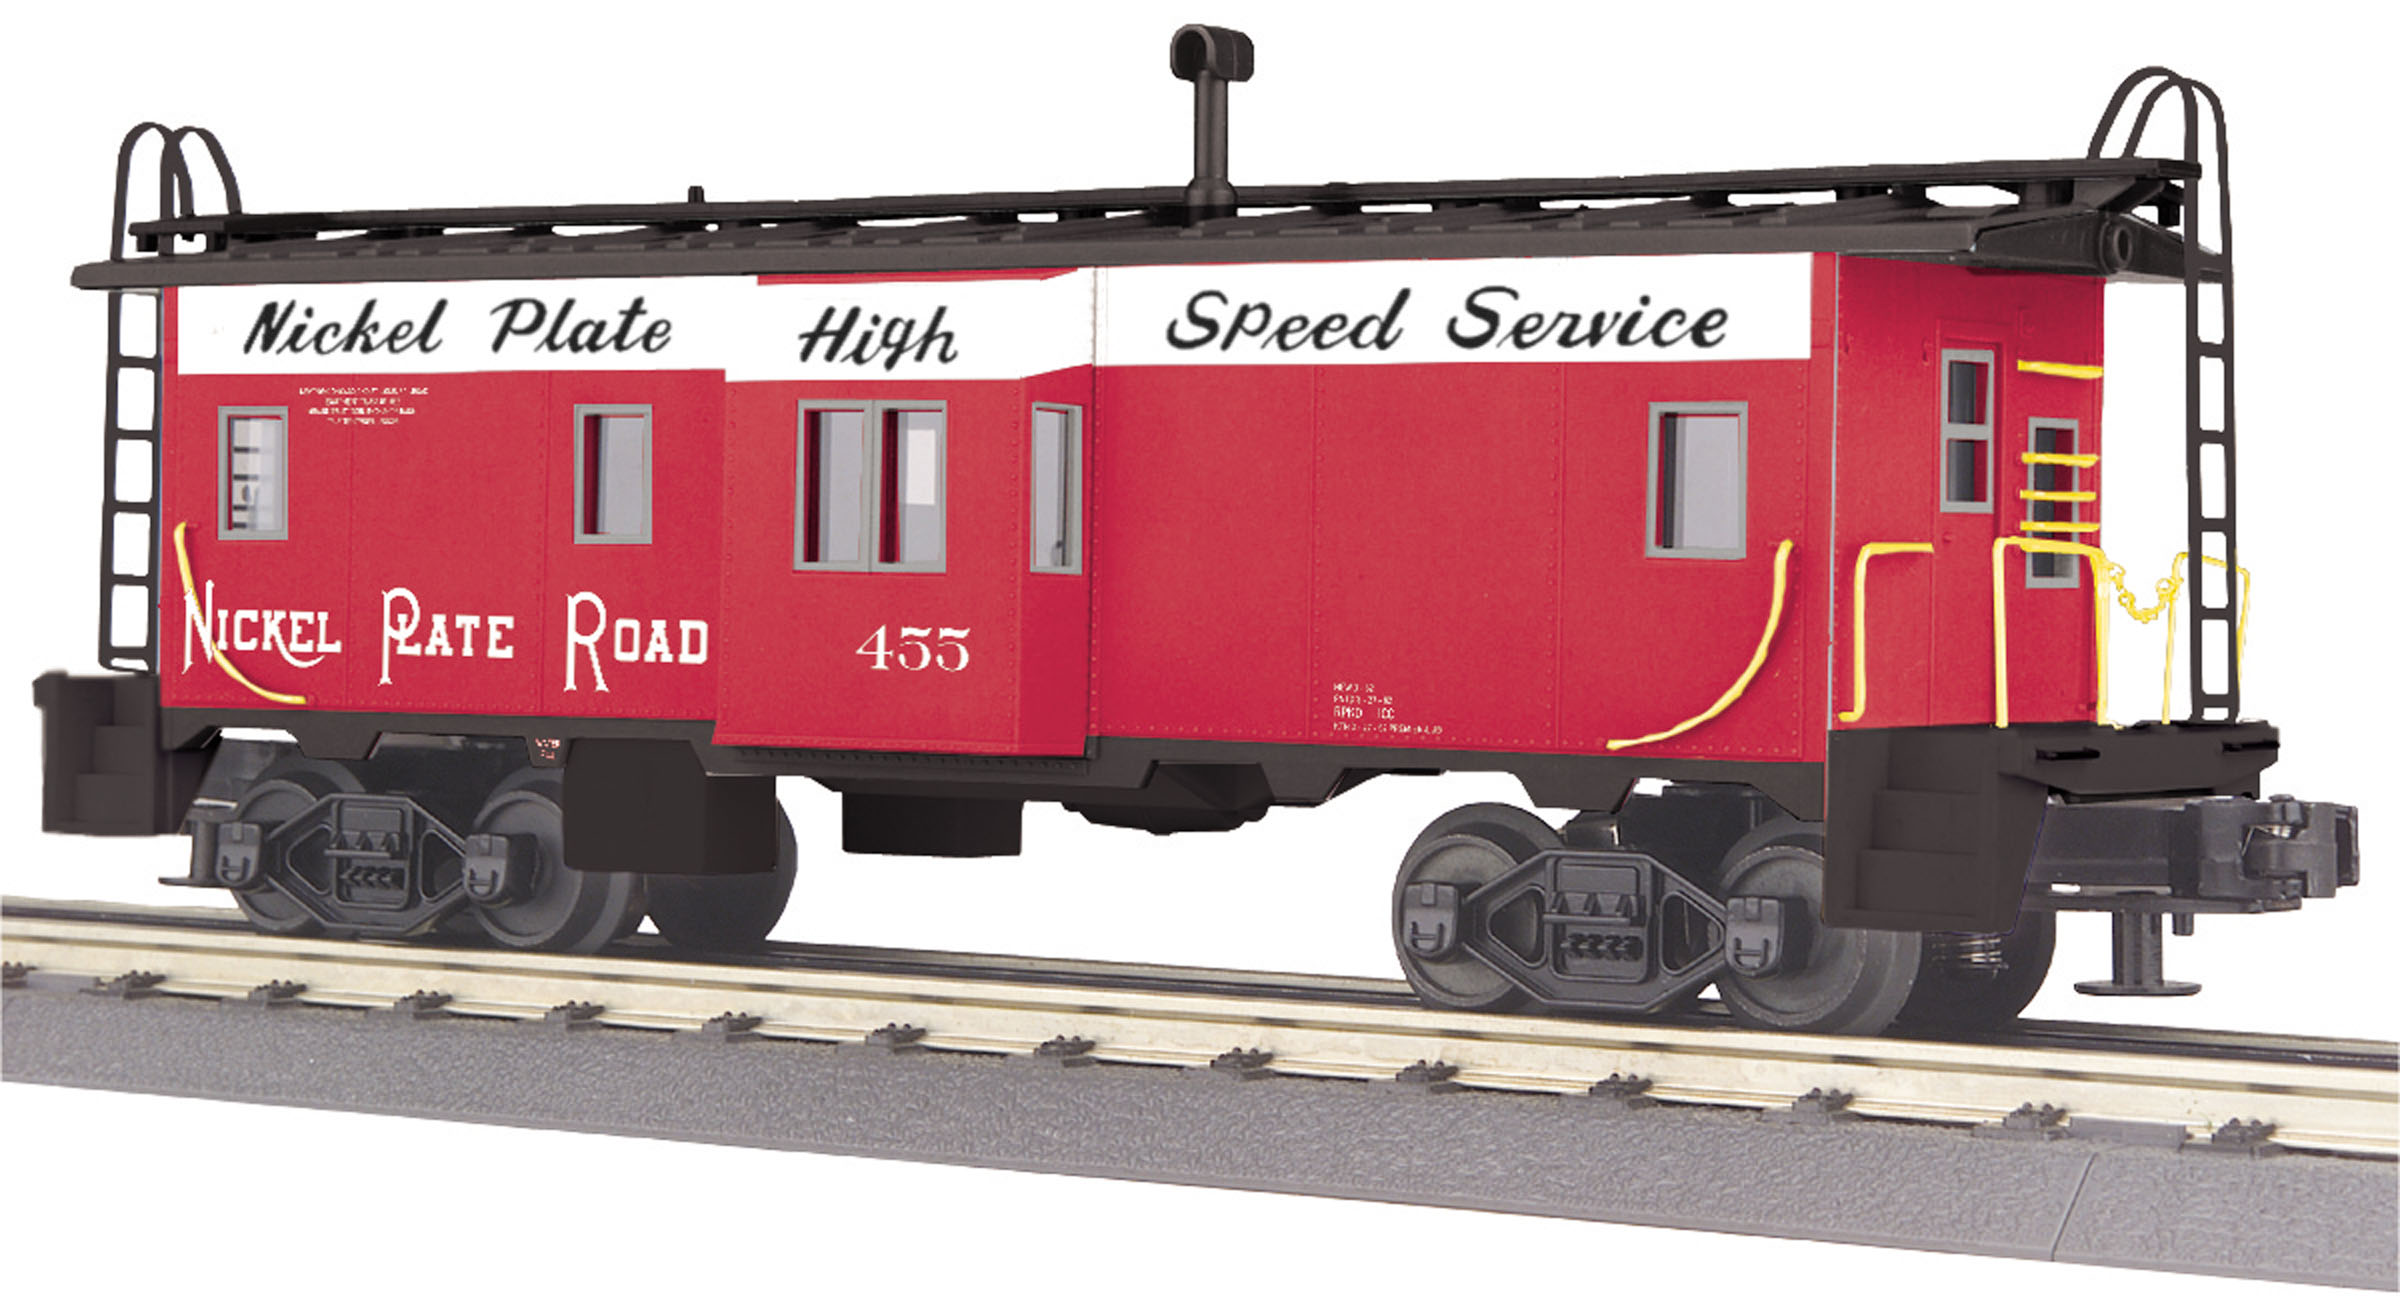 Image result for mth railking nickel plate road caboose